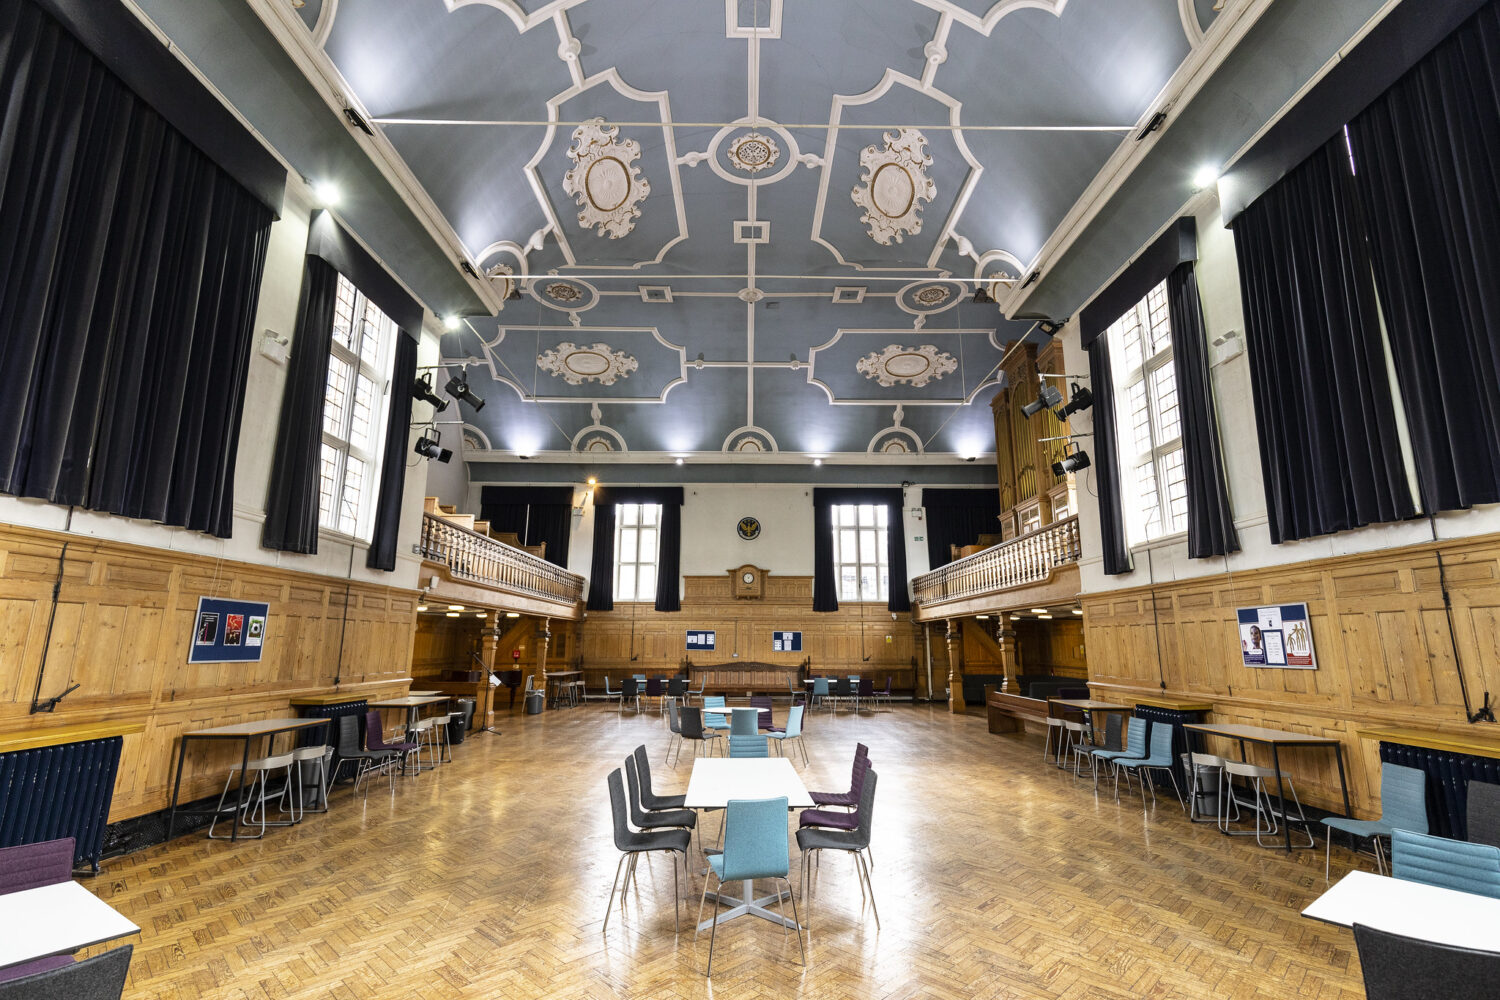 The Bedford Sixth Form Grand Hall